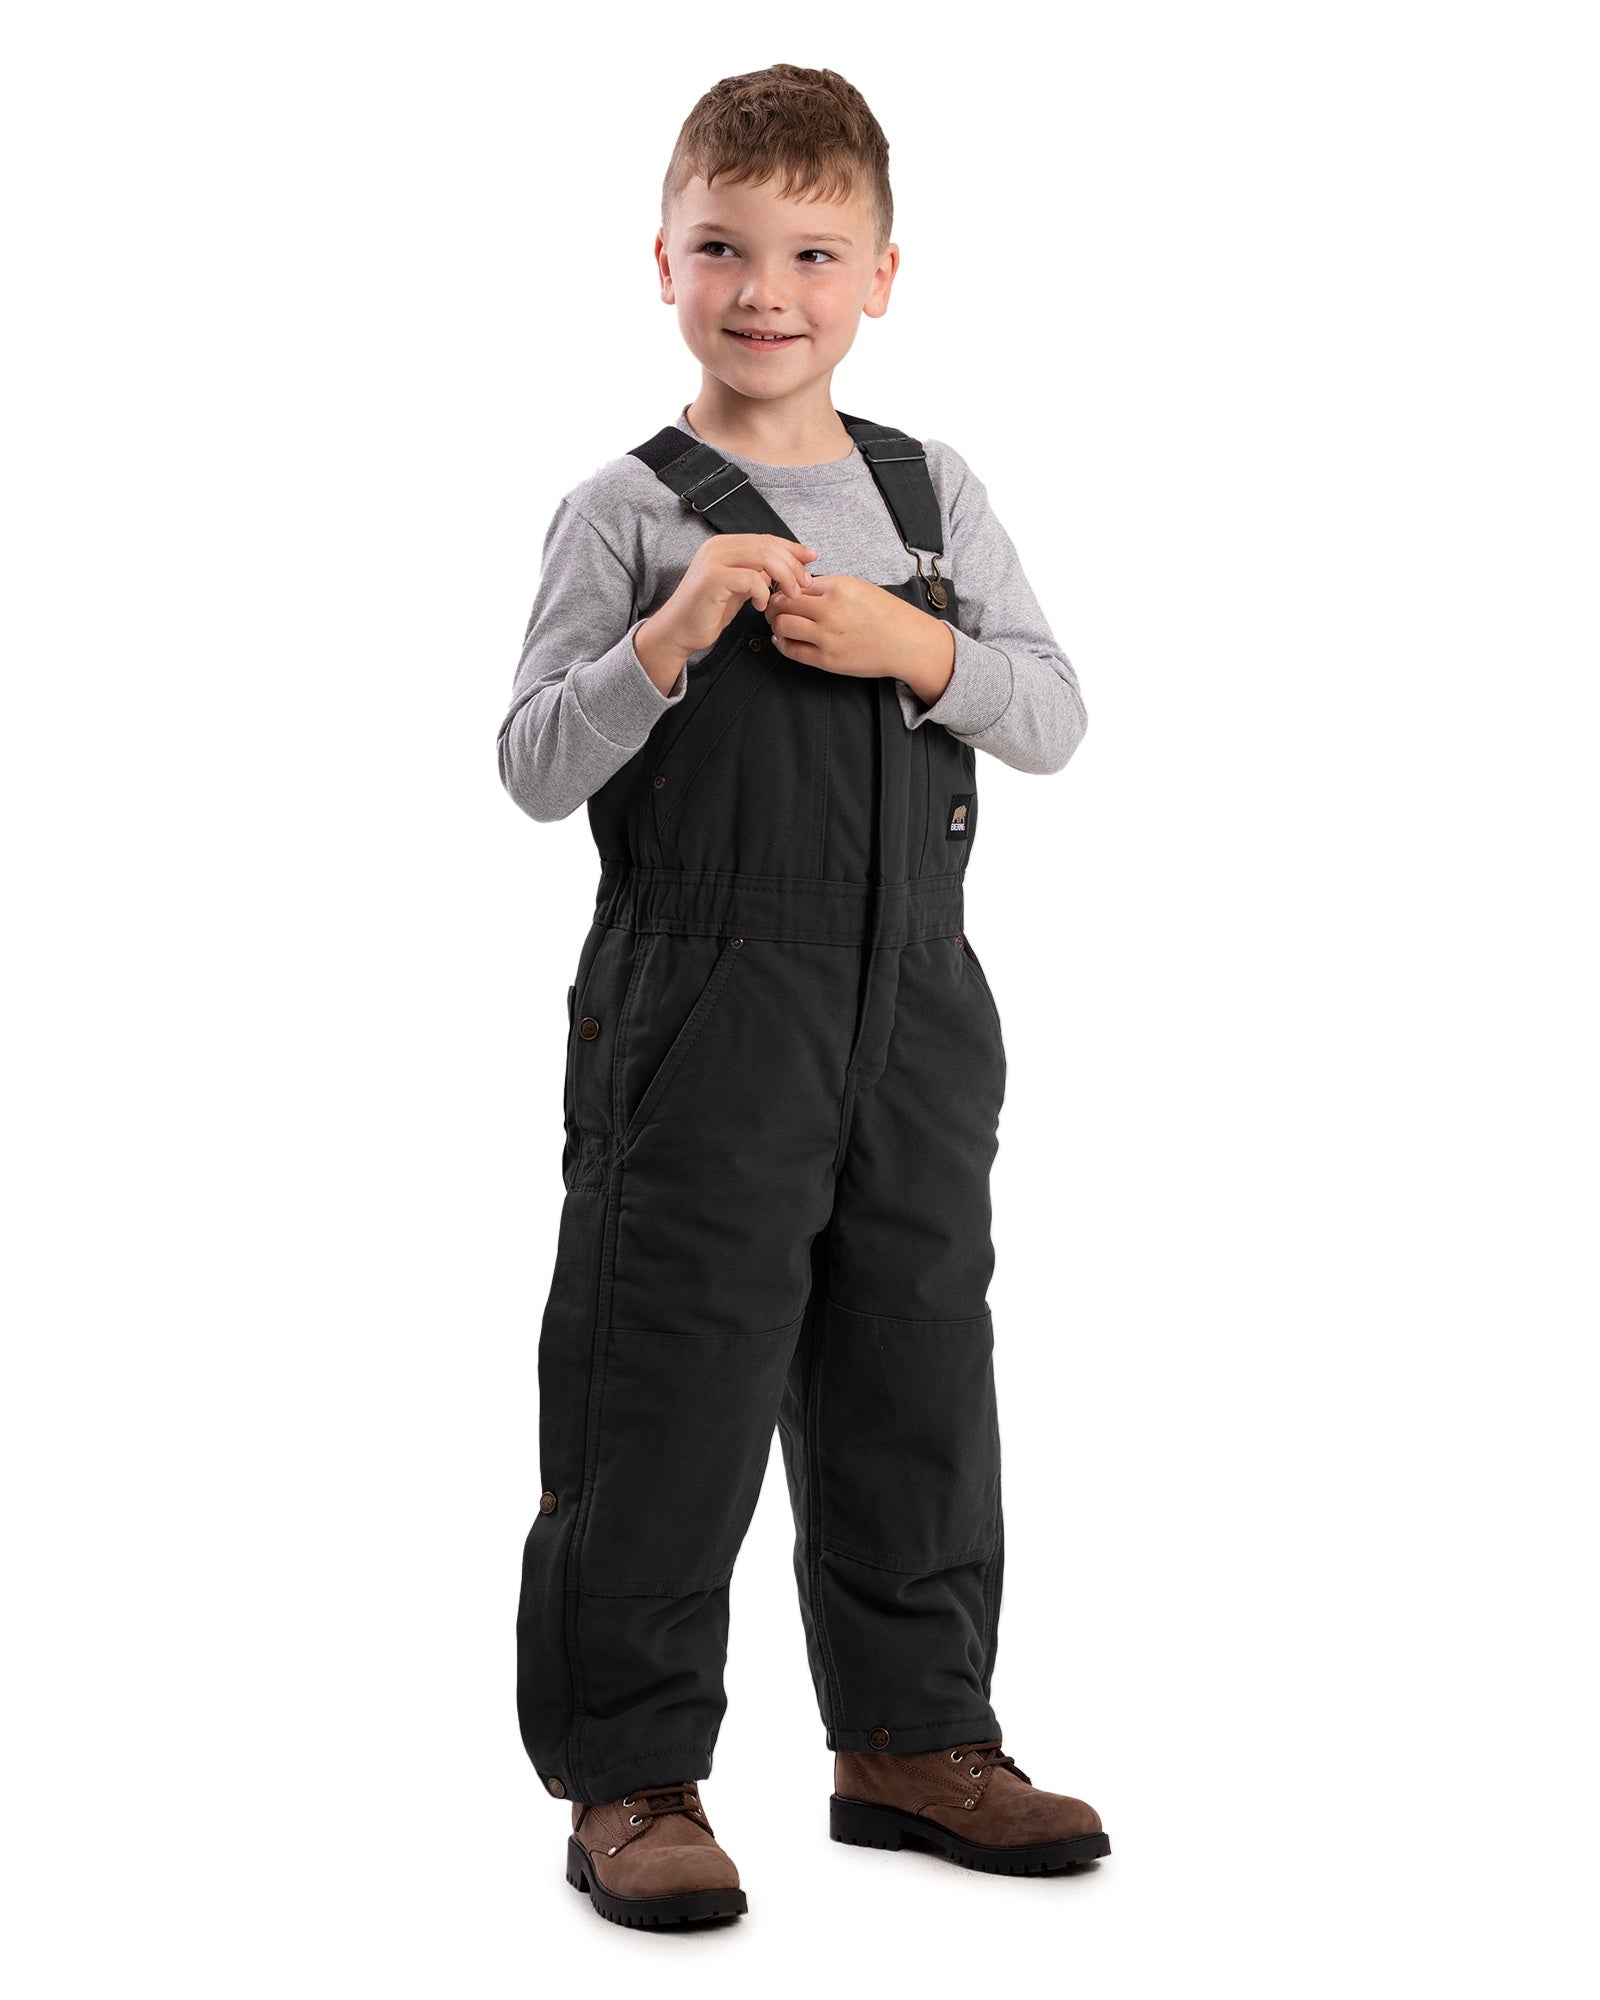 Berne Men's Heartland Insulated Washed Duck Bib Overall - Black